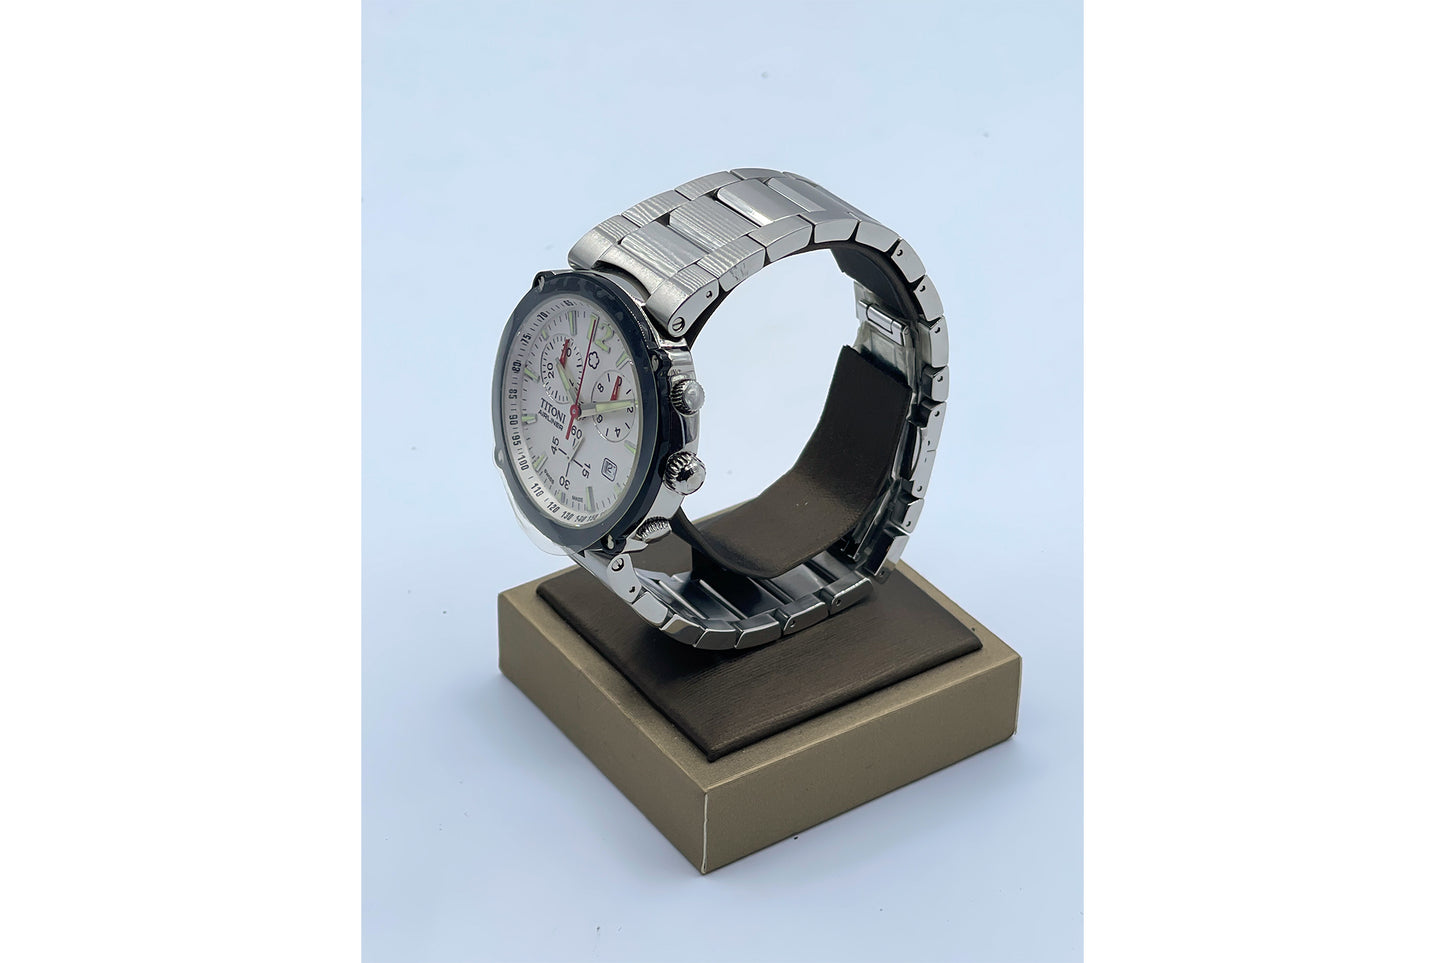 Titoni Airliner S/S Case Silver Bezel, White Dial [WB-646-TIT]